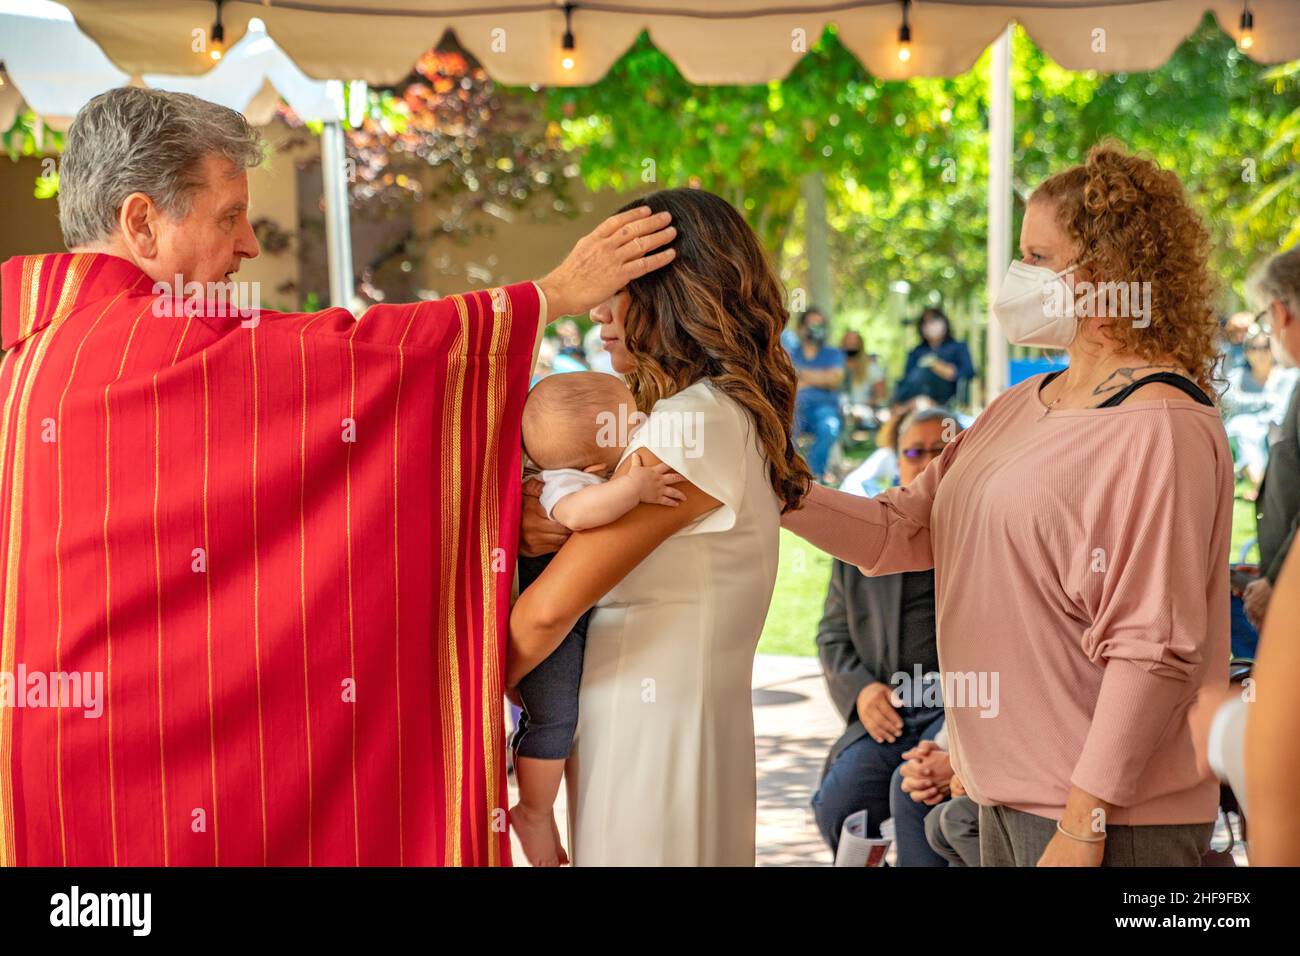 Holding her baby, a candidate for adult baptism is blessed by a monsignor at a Southern California Catholic church. Note sponsor at right. Stock Photo